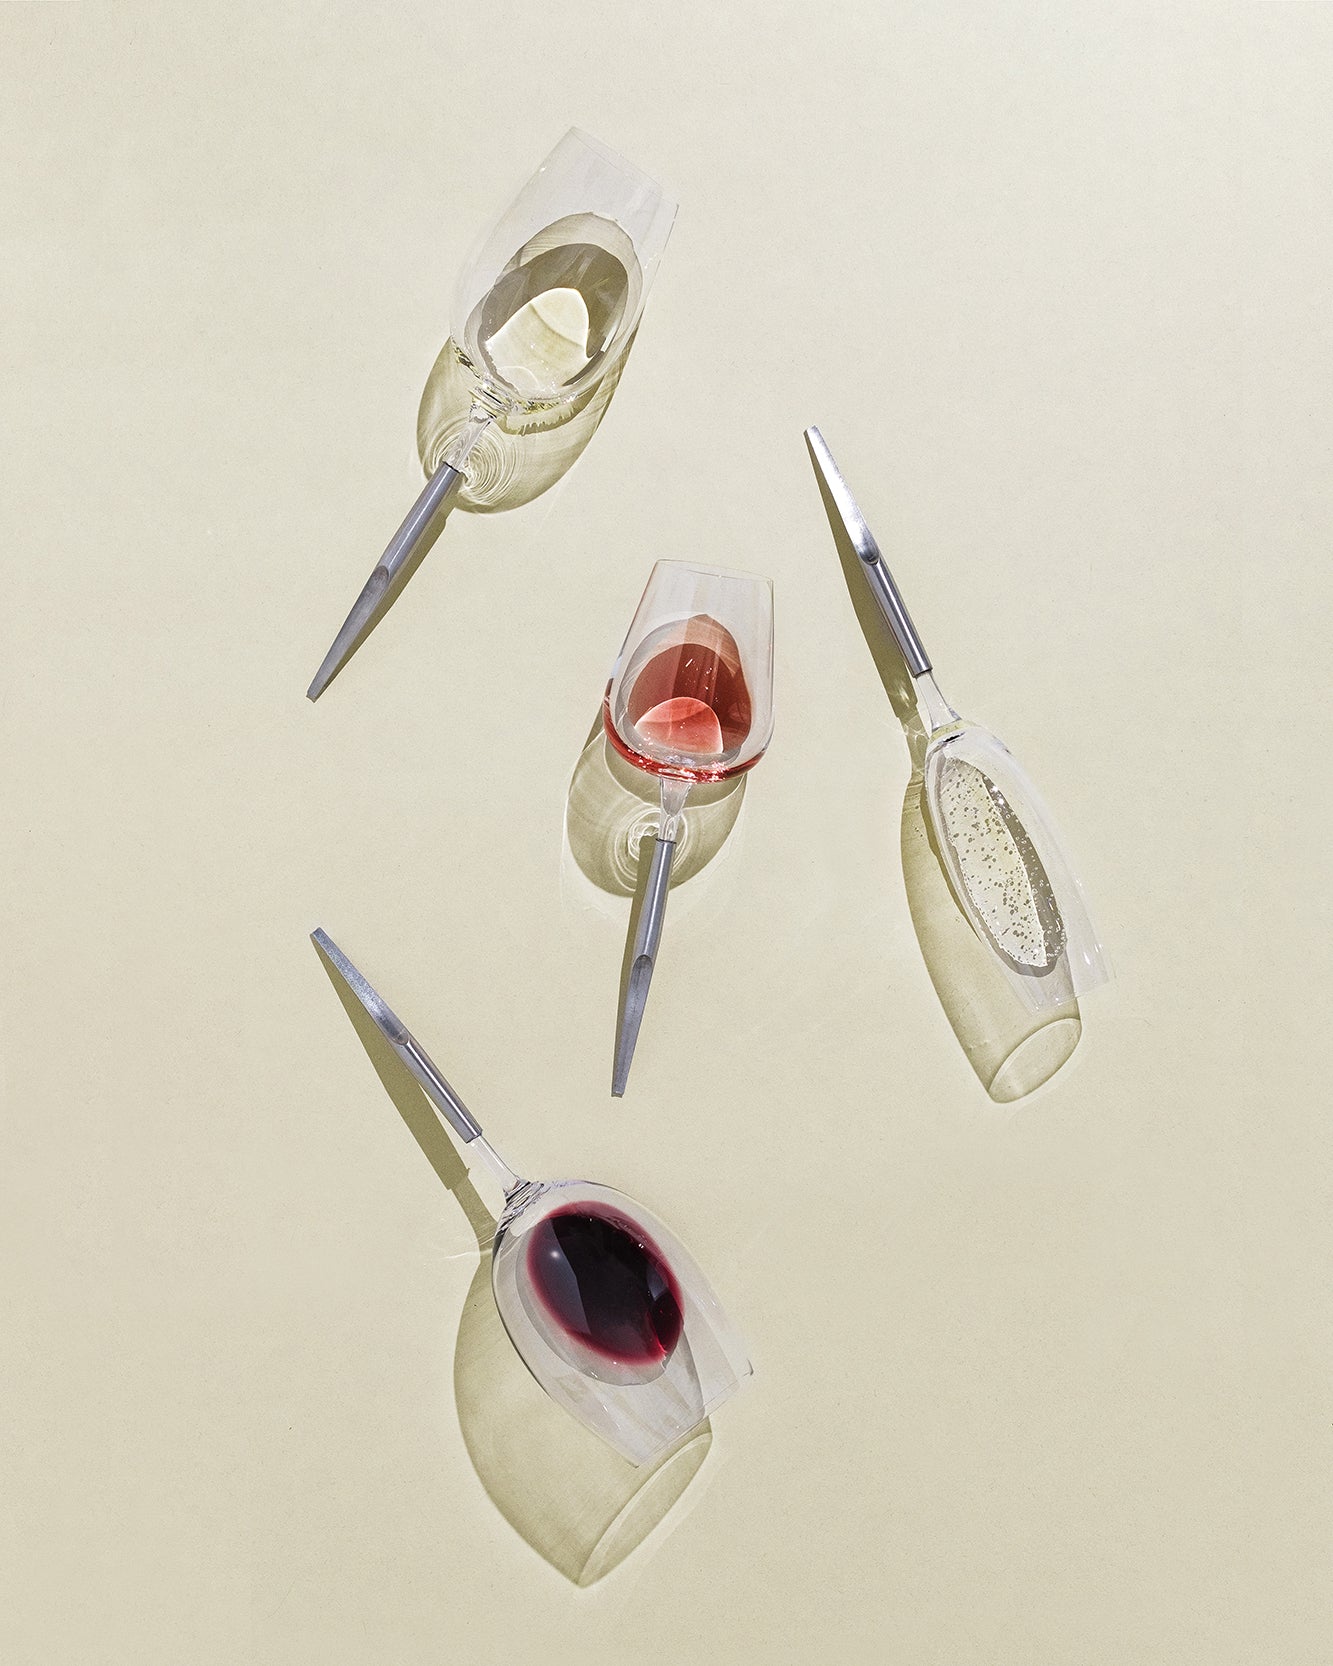 picnic wine glasses with metal pin for white wine, red wine and champagne, placed horizontally on a beige background and half filled with wine